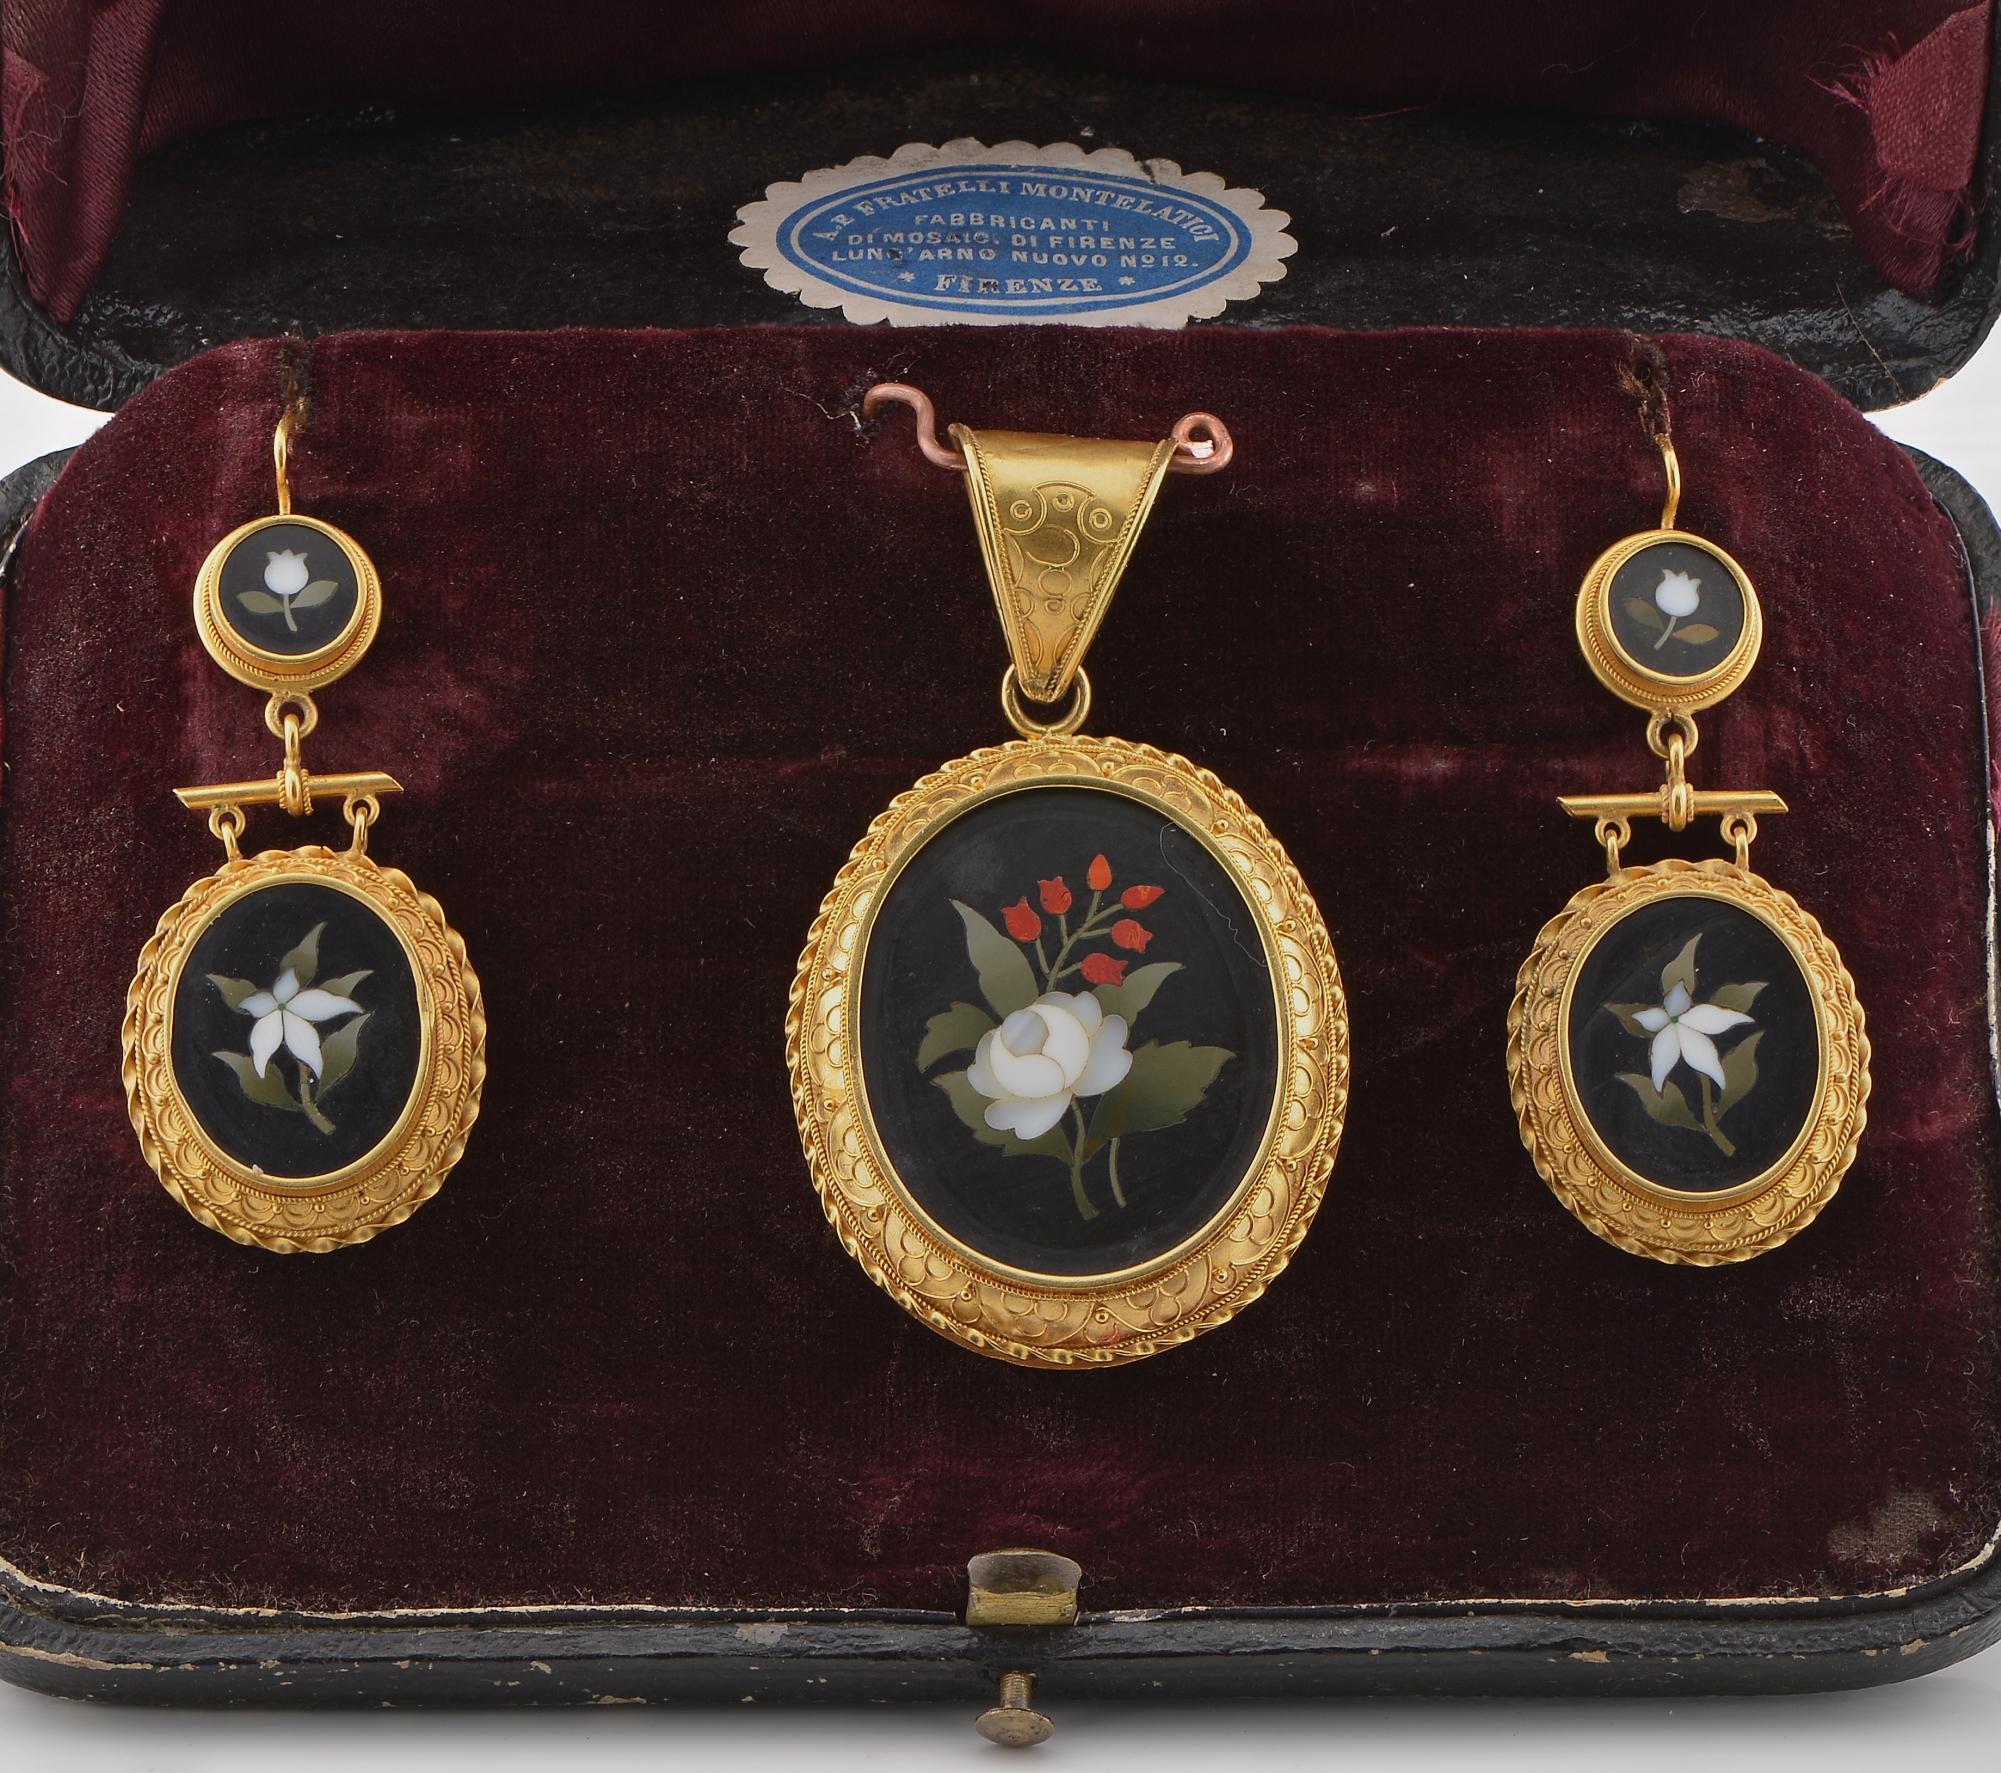 Past Fashion Impressed into Time
Very representative and distinctive Victorian period Etruscan revival earrings and pendant set, beautifully hand fabricated by MONTELATICI Angiolo e fratelli , Firenze (1860/1880) bearing the original maker label